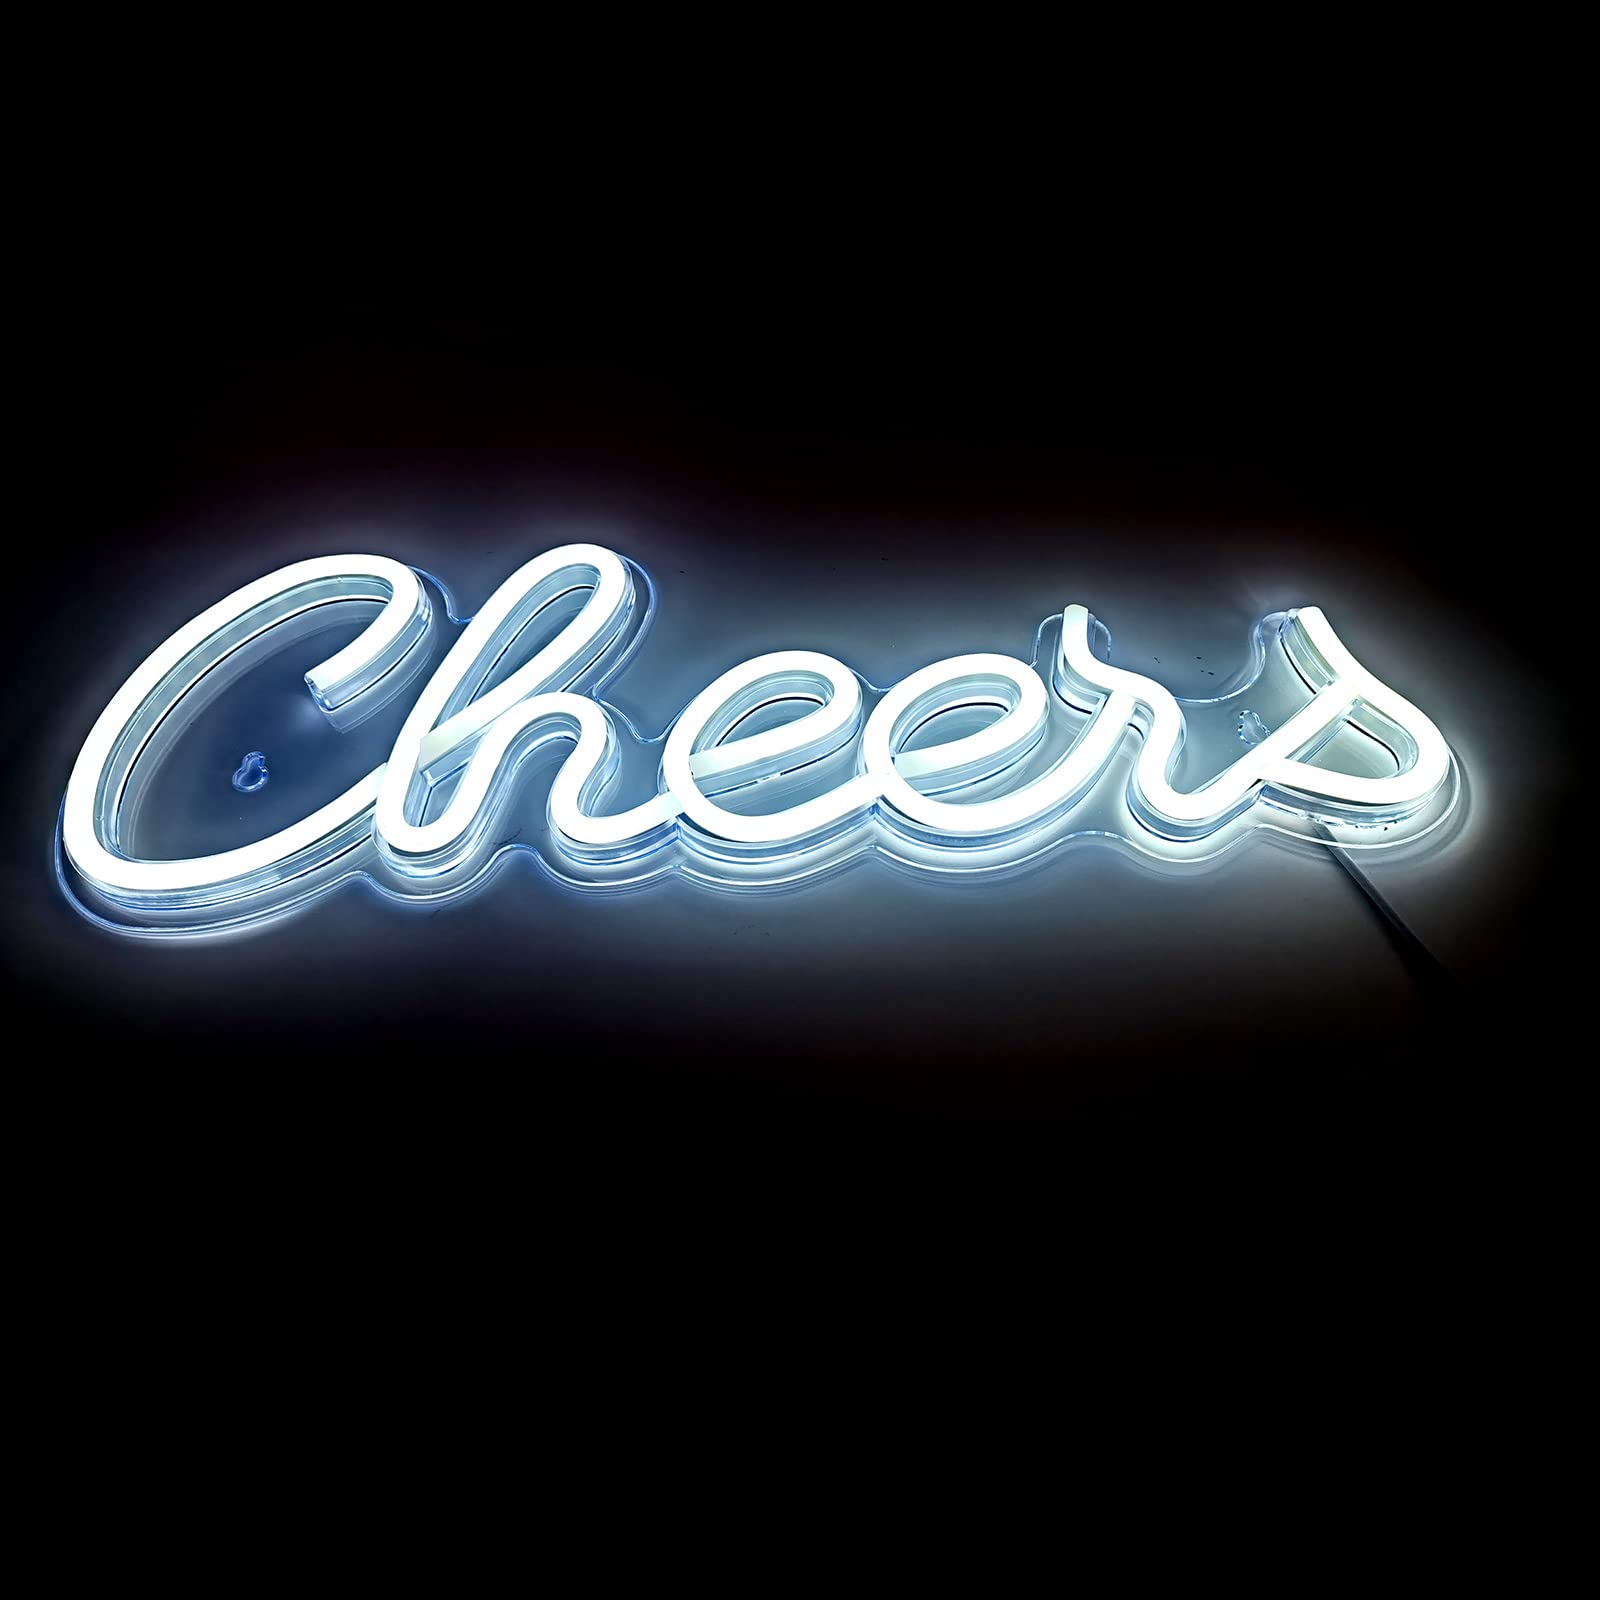 Cheers Neon Signs, LED Beer Bar Cheers Light Decor, Powered by USB, Wall Décor Accessories for Pub Cafe Wedding Birthday Party Neon Light Art Wall Lights